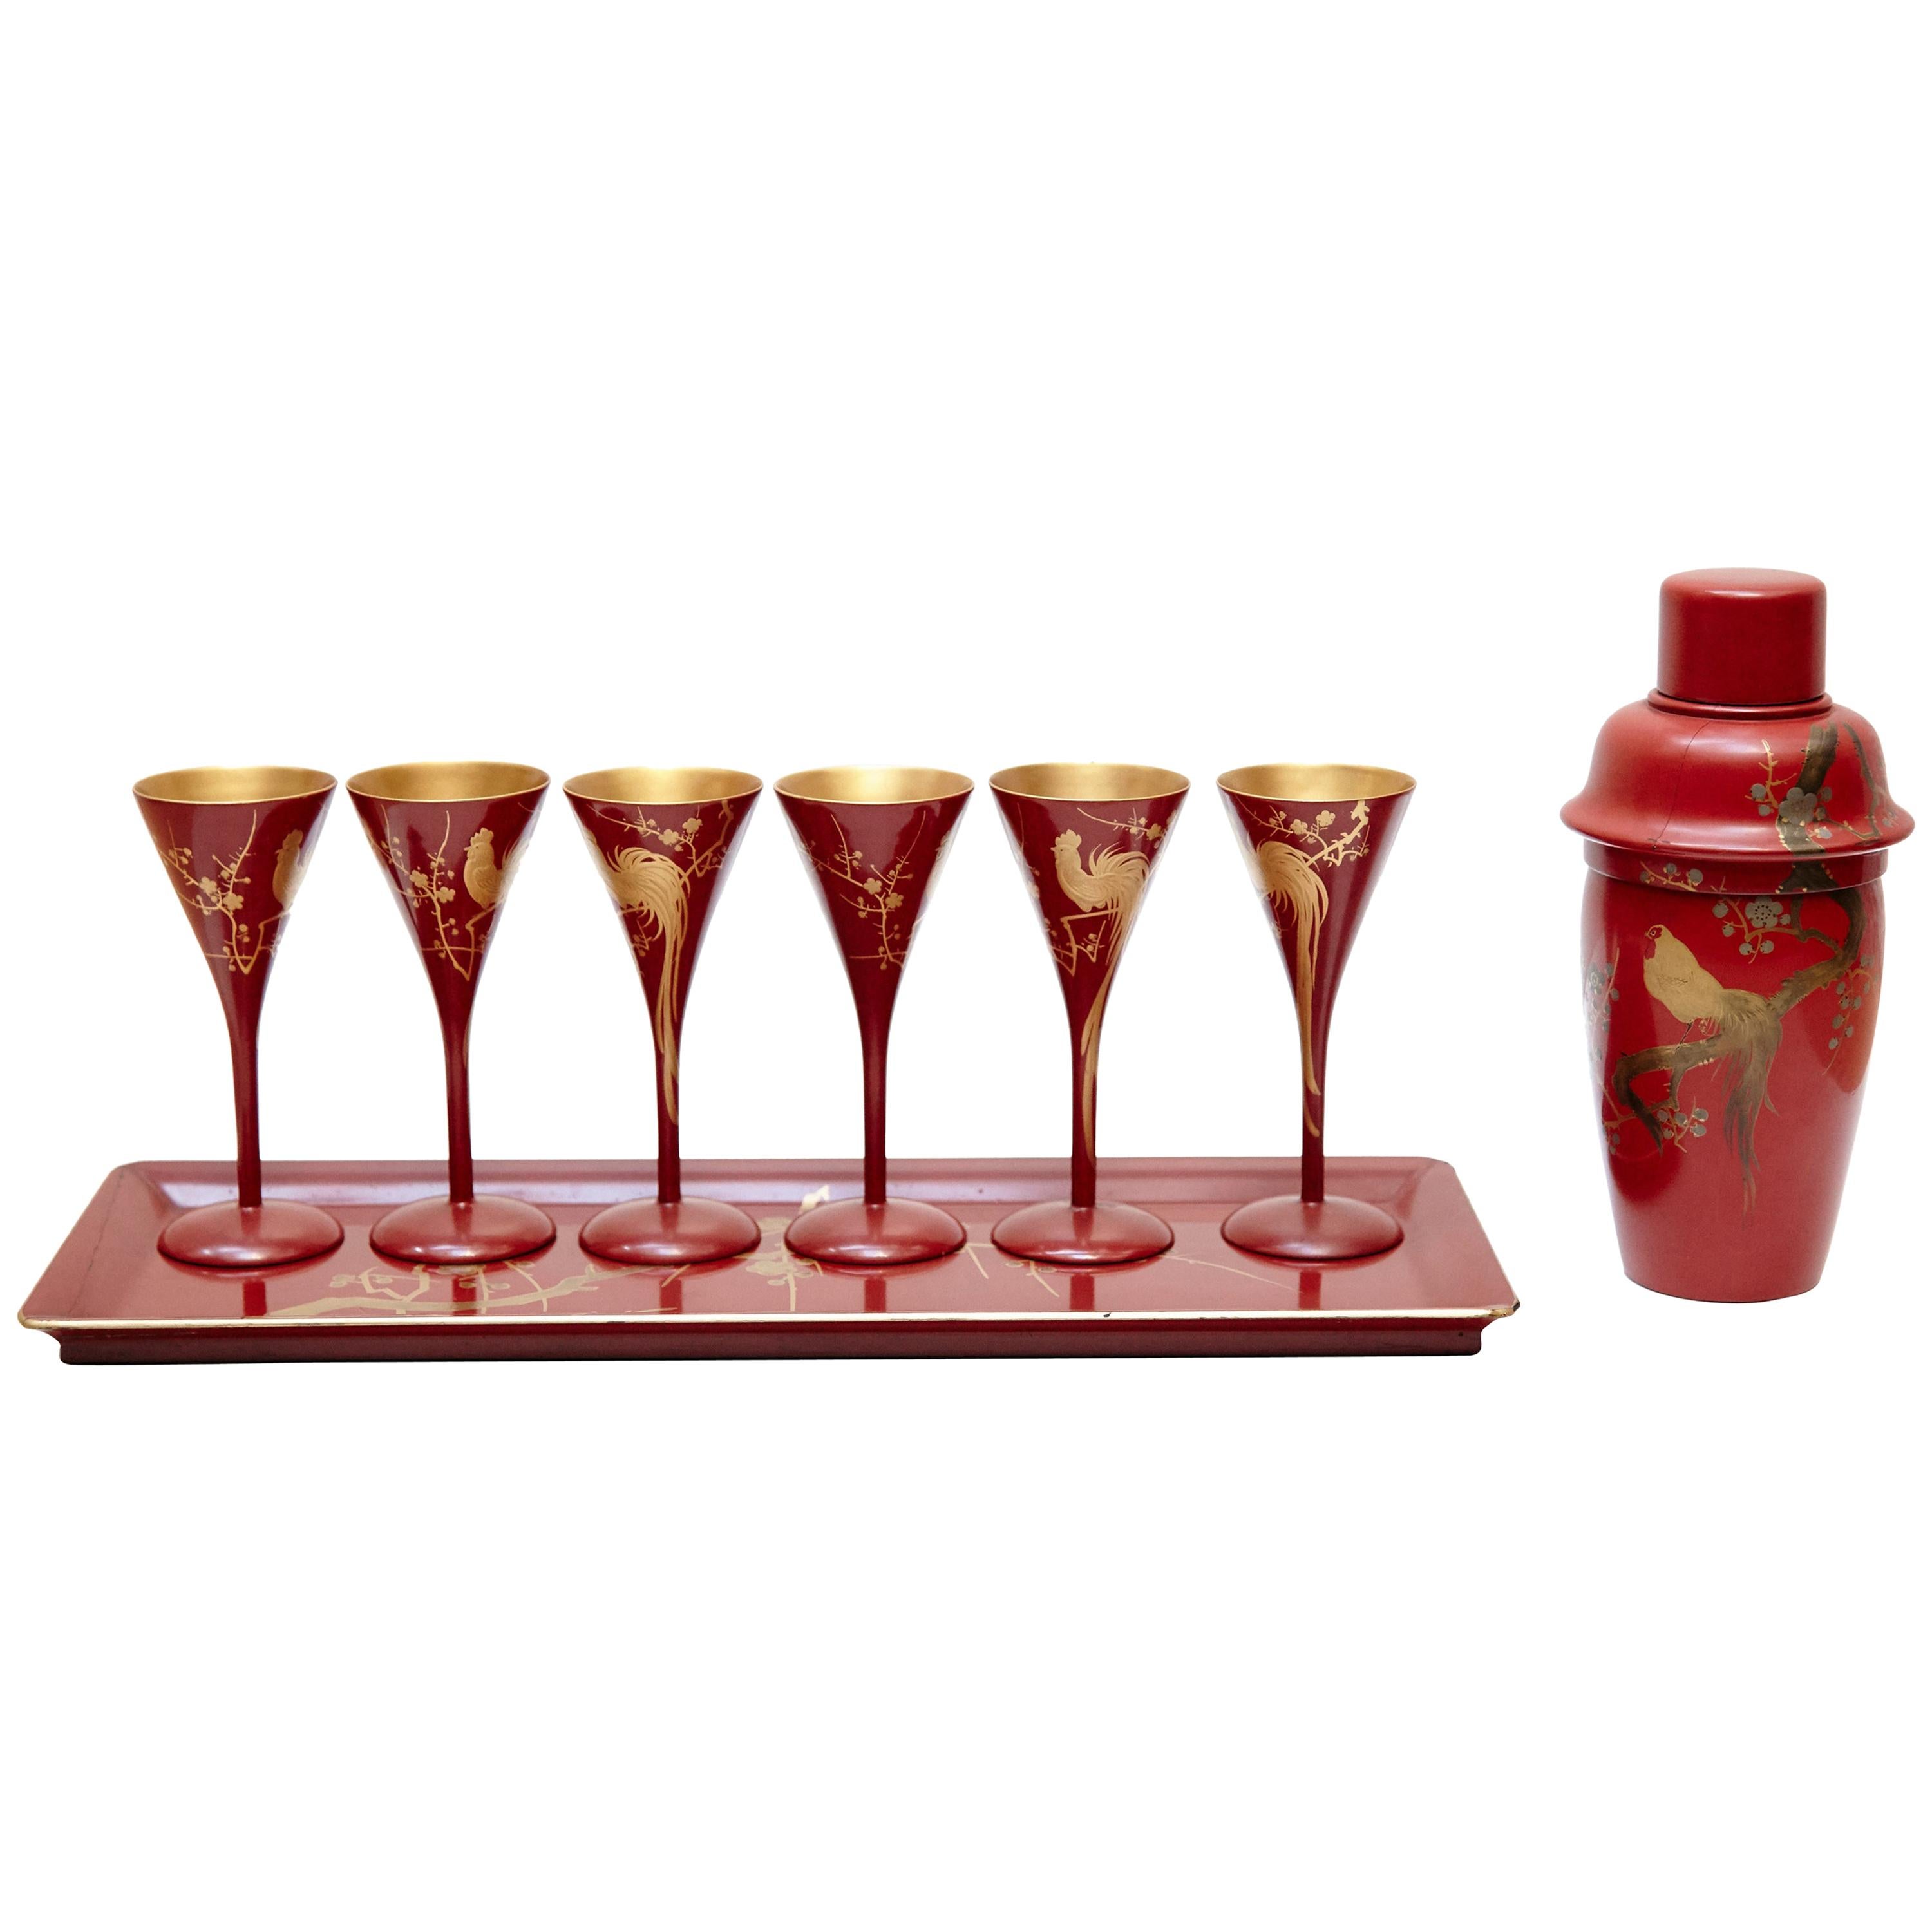 Cocktail Urushi Japanese Red Lacquered Set from England, circa 1910